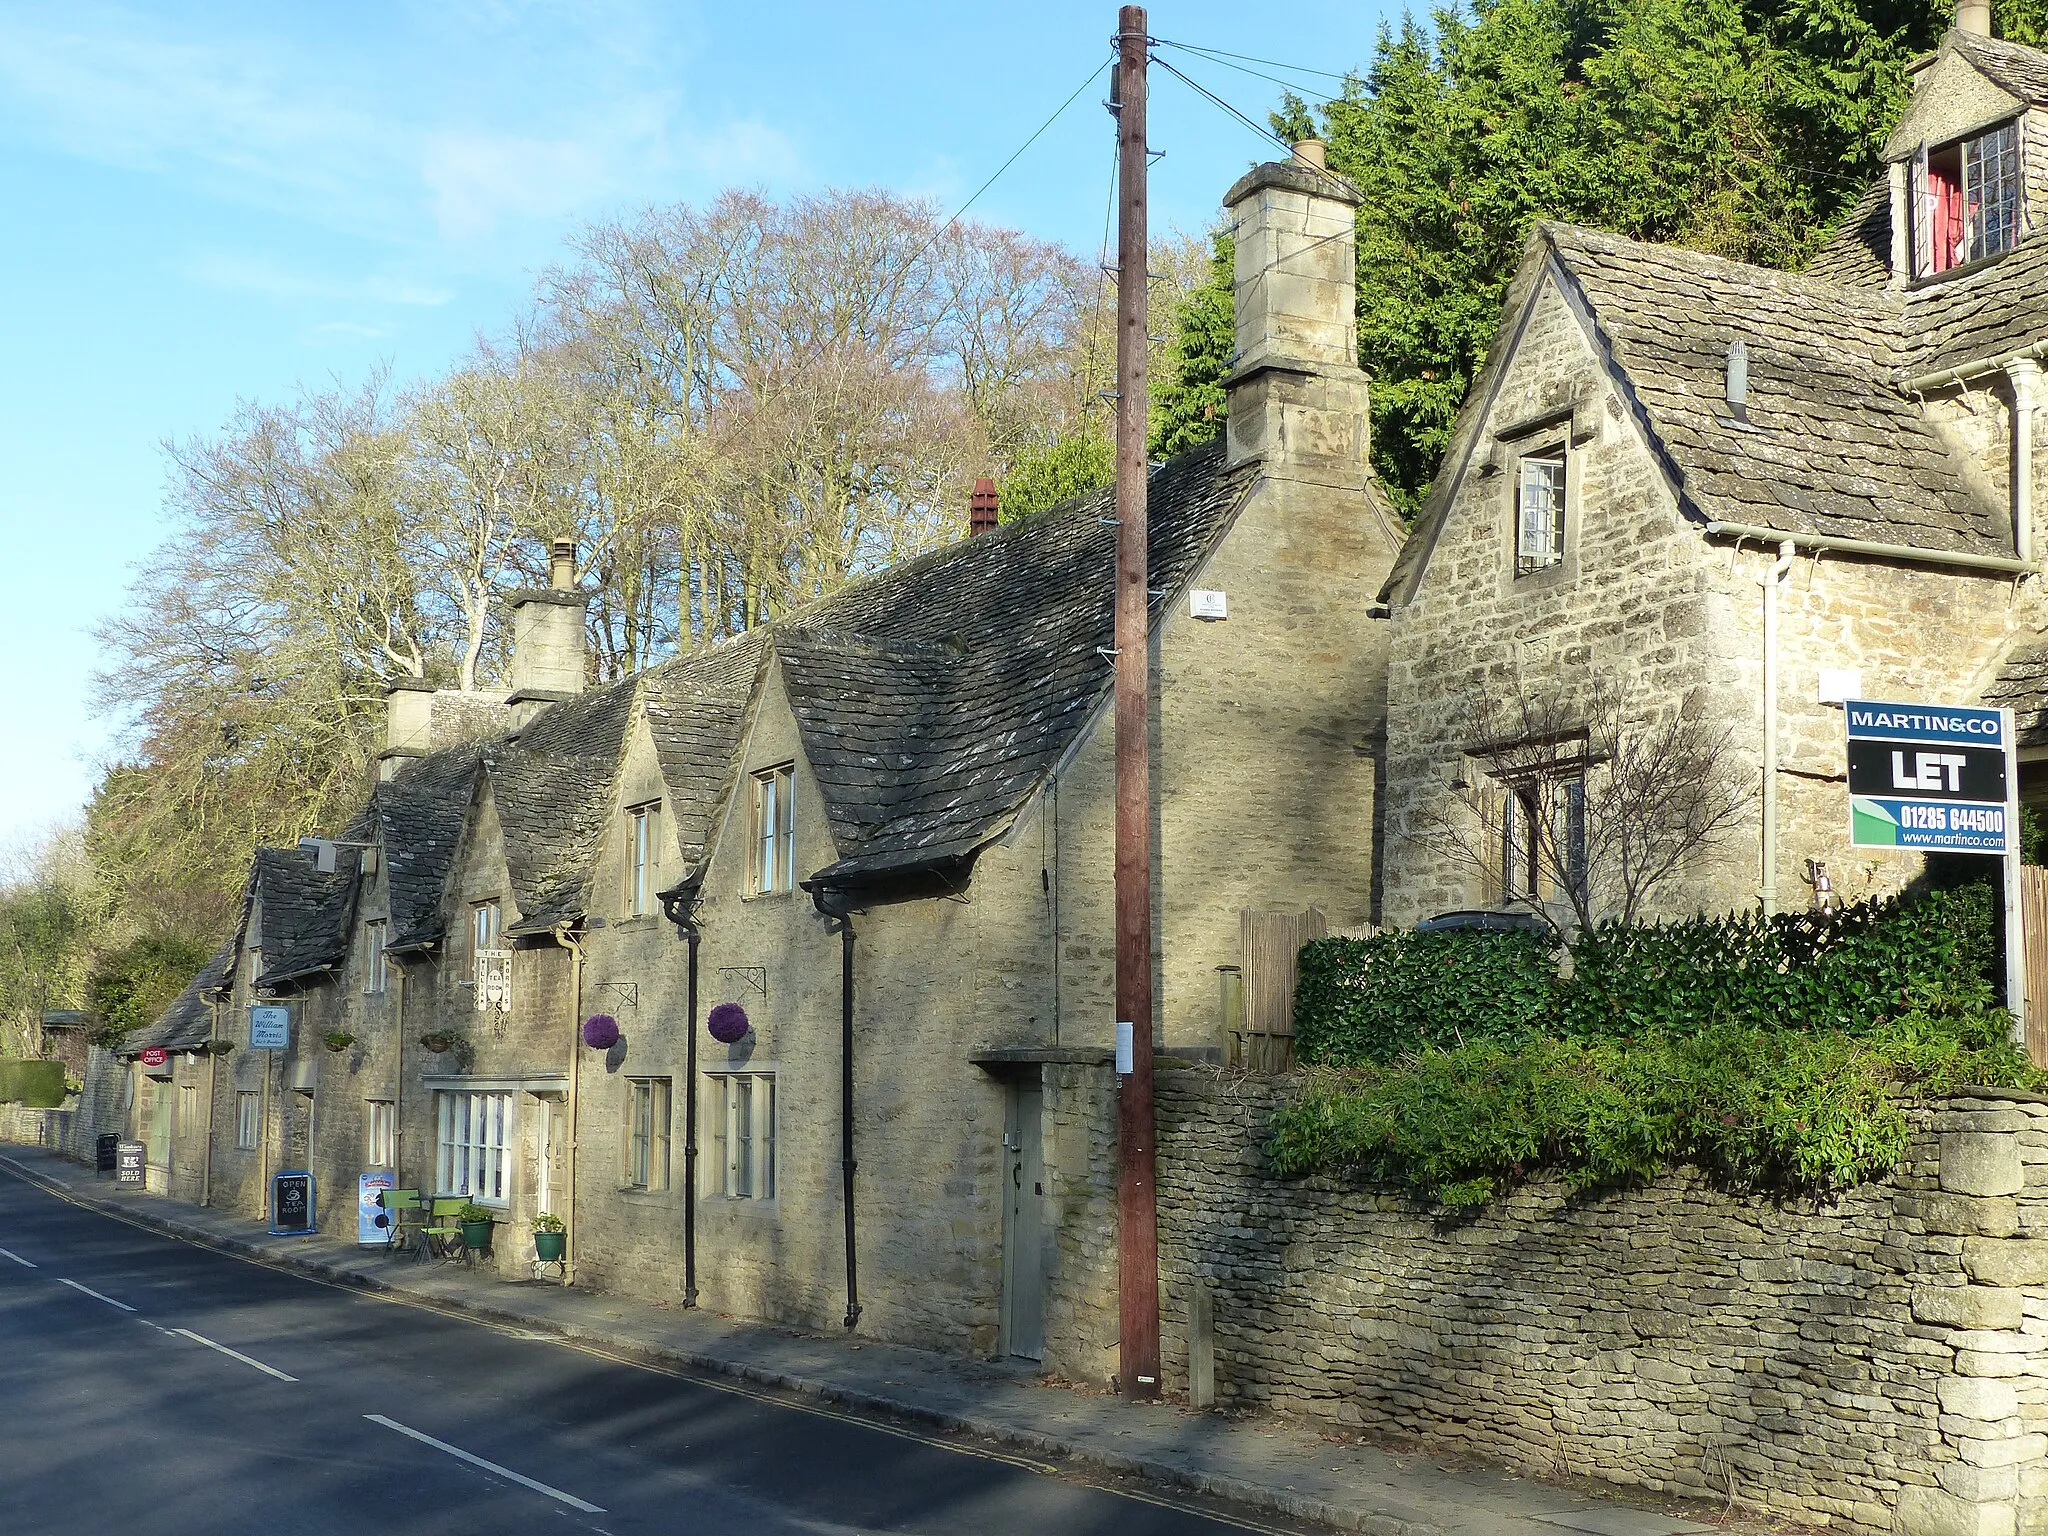 Photo showing: Grade II listed houses in Bibury, Gloucestershire. Listed as "10 and 11, the Street, and No 12 (Troutbeck Cottage)". Wikidata has entry 10 and 11, the Street, and No 12 (Troutbeck Cottage) (Q26448180) with data related to this item.